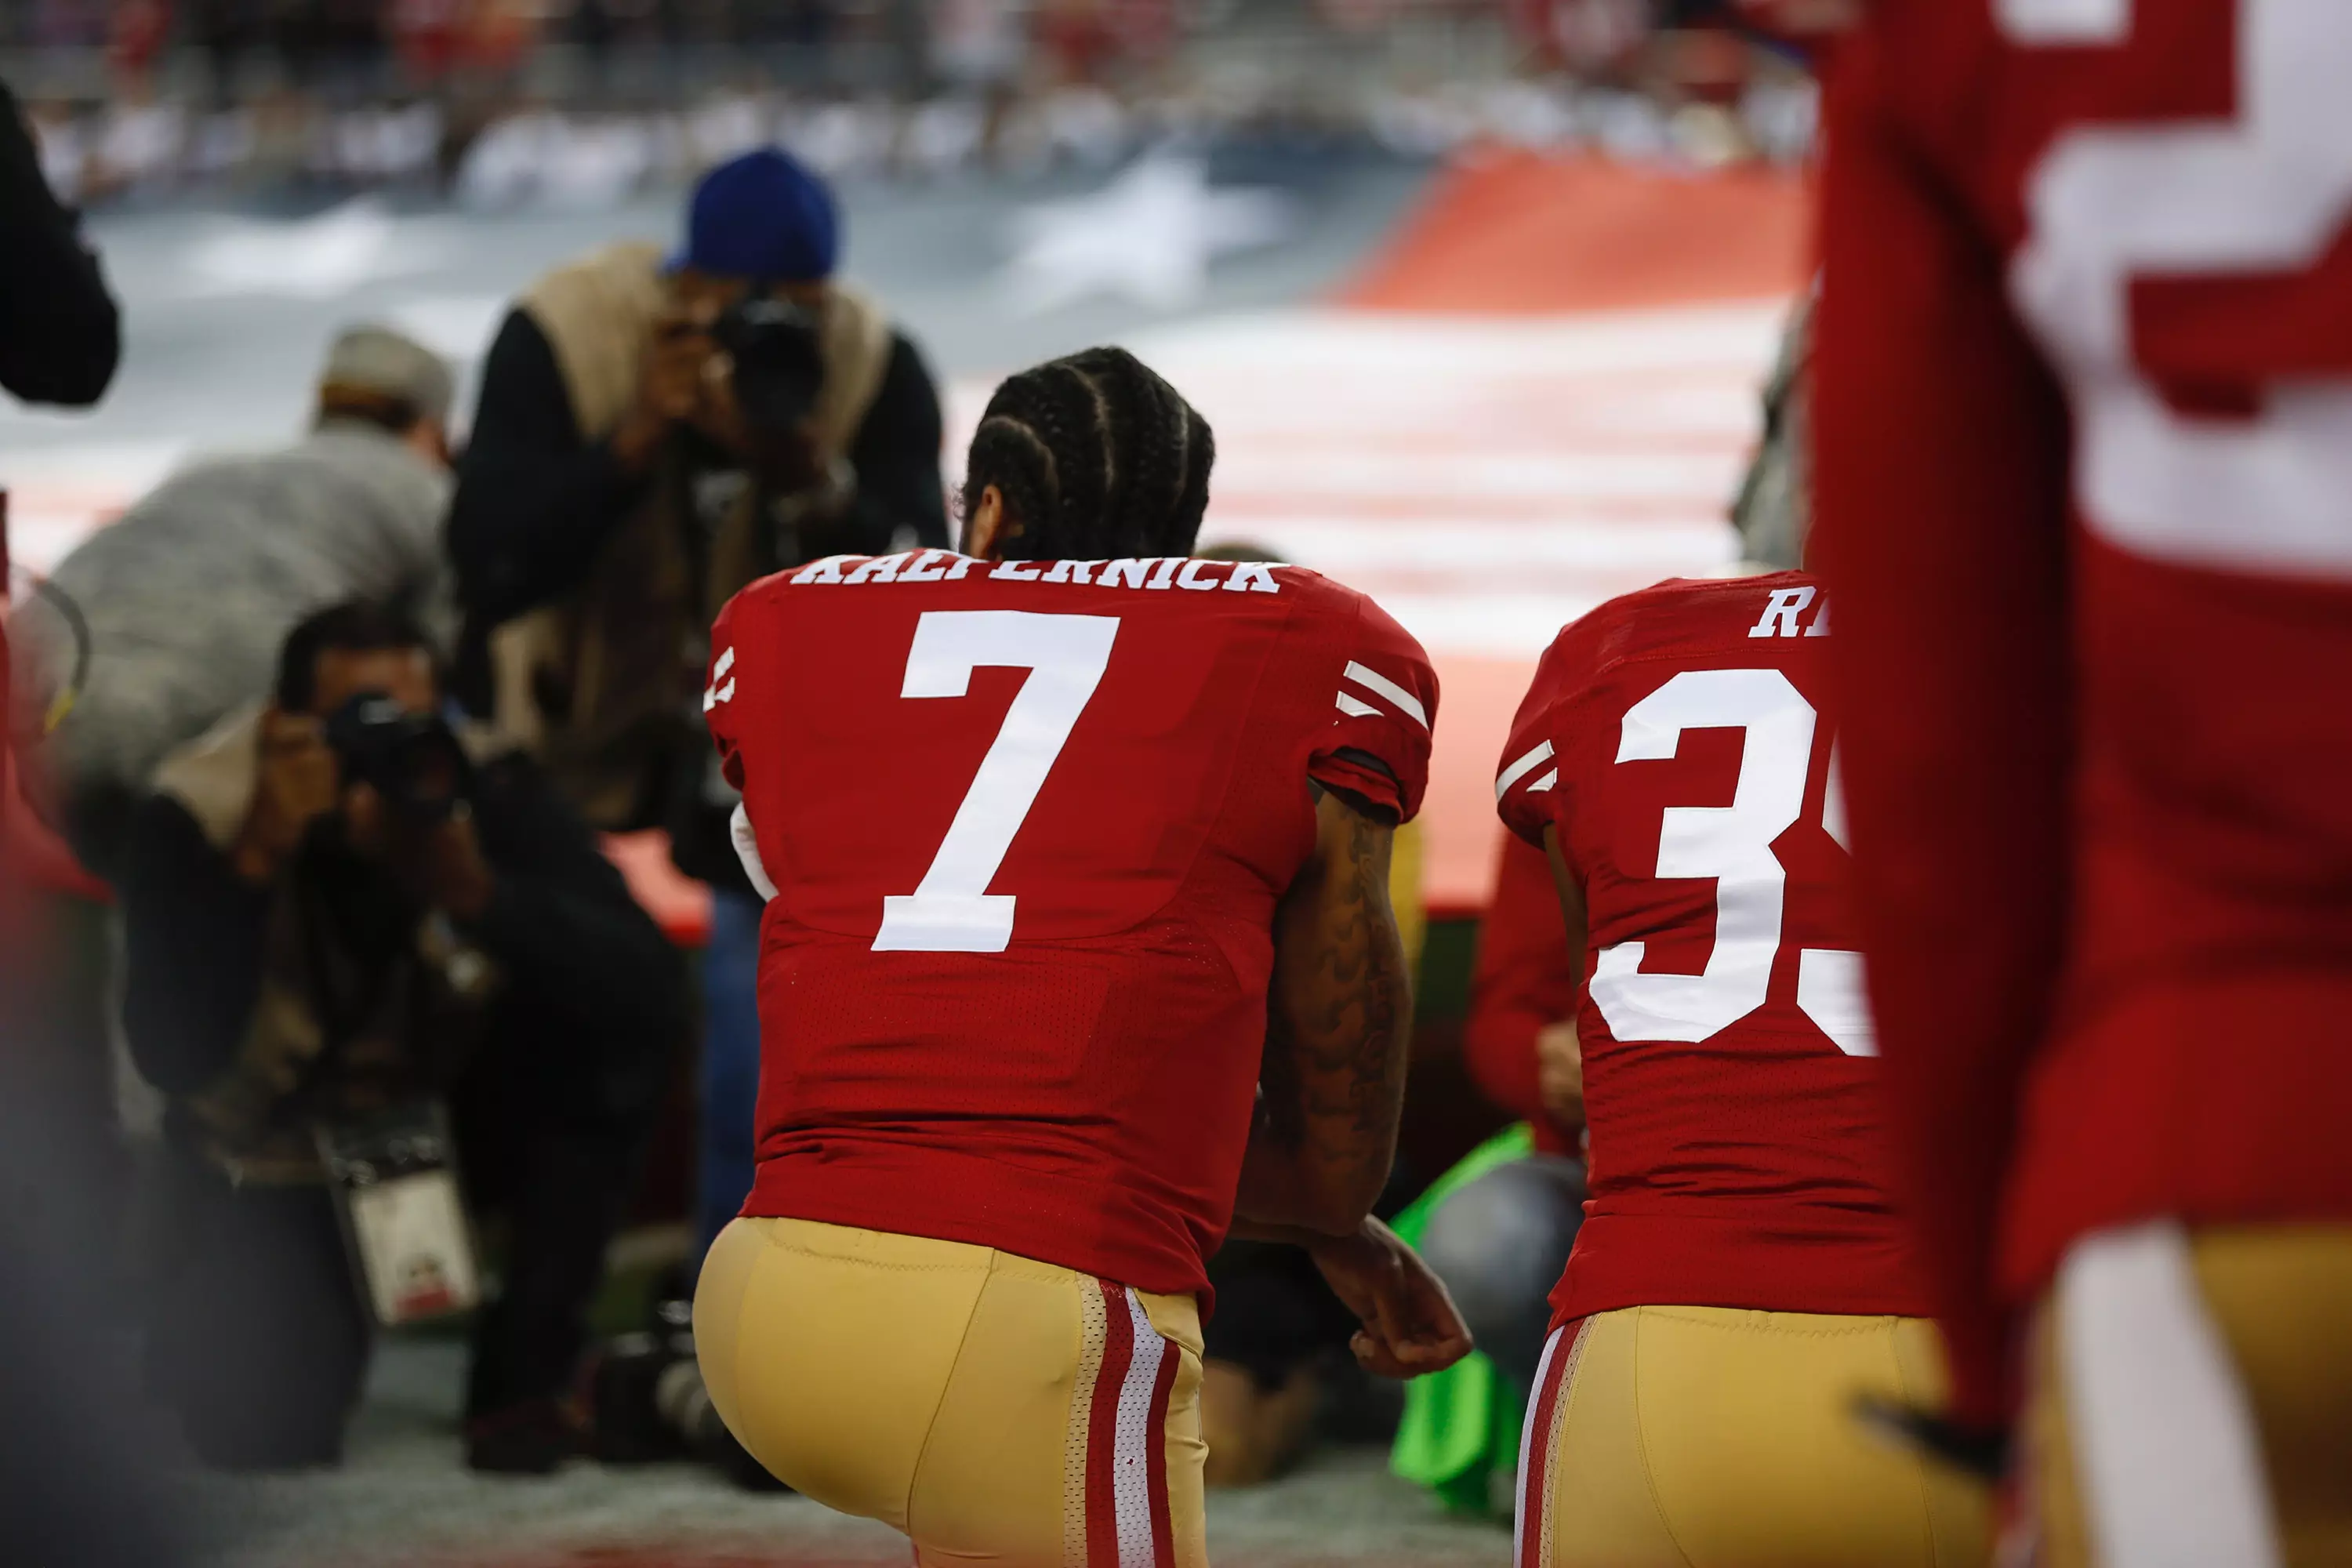 Colin Kaepernick took a knee during the US national anthem in 2016